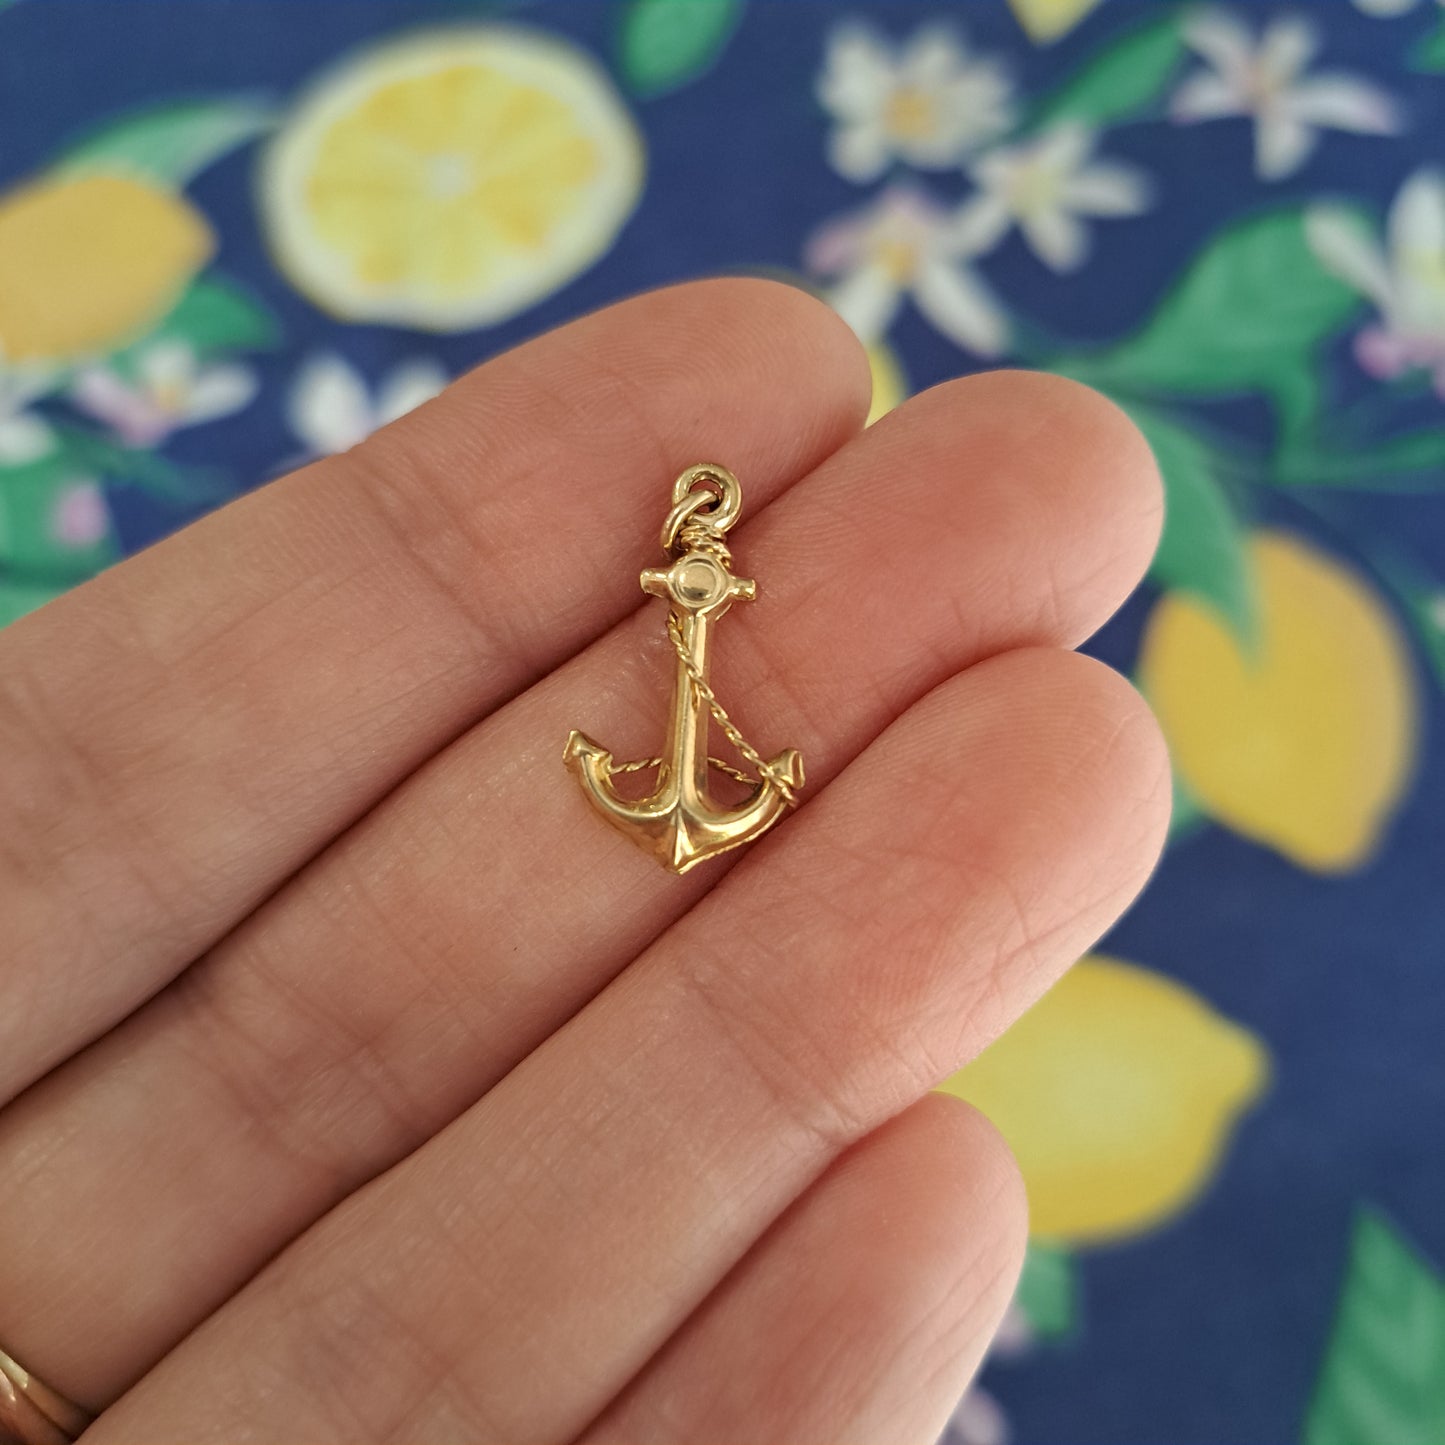 Pre-owned 9ct Gold Anchor Charm / Pendant